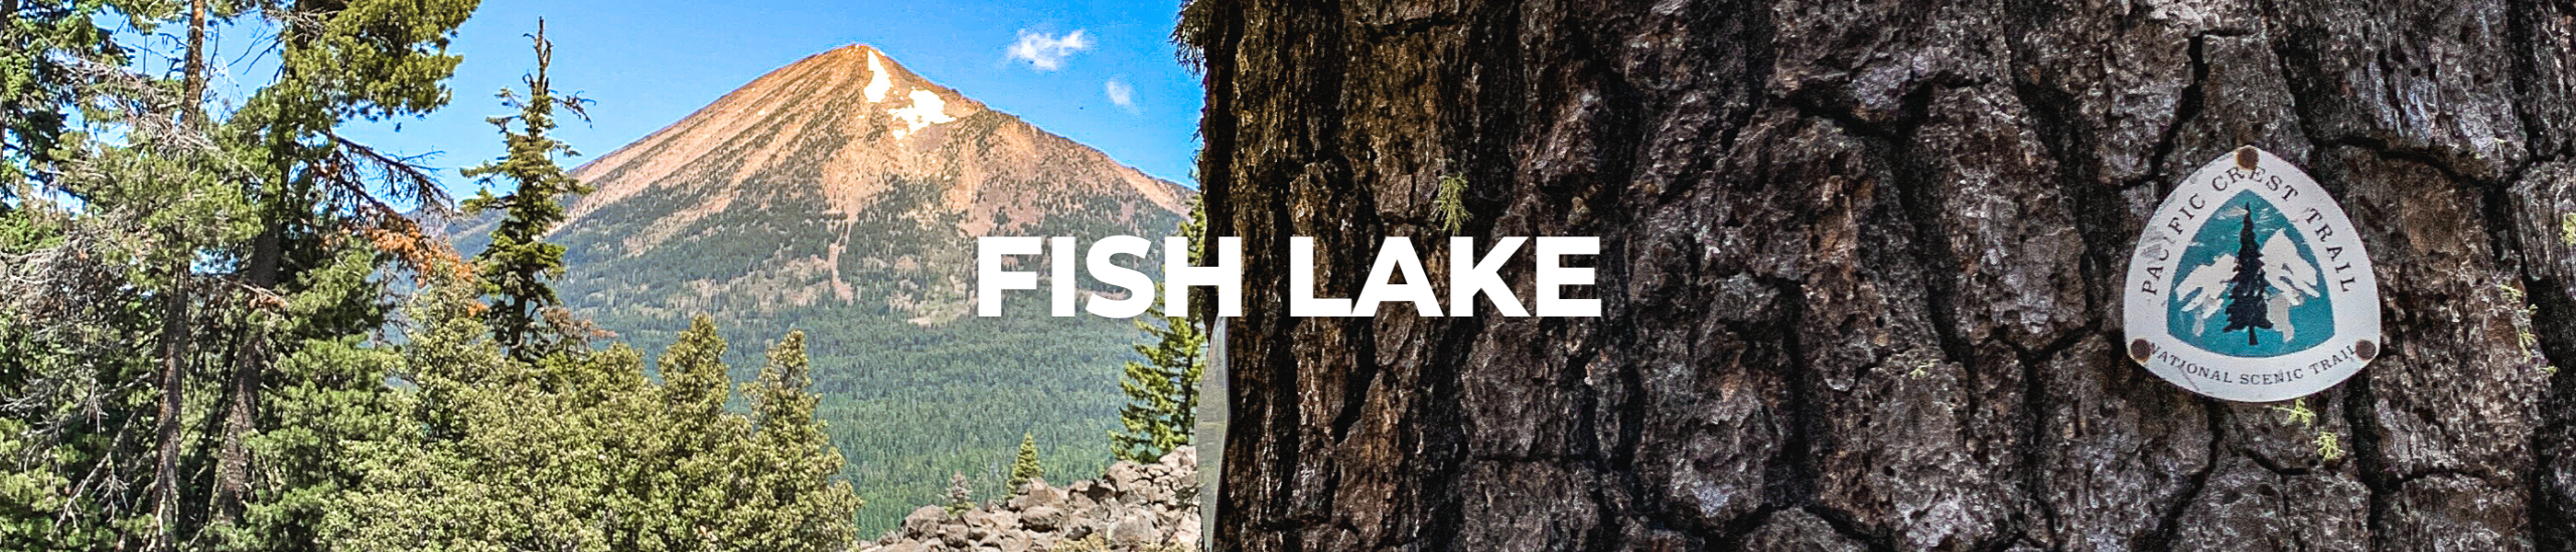 fish lake with Mt. McLoughlin in the background, lakes, fishing, swimming, things to do, outdoor adventure